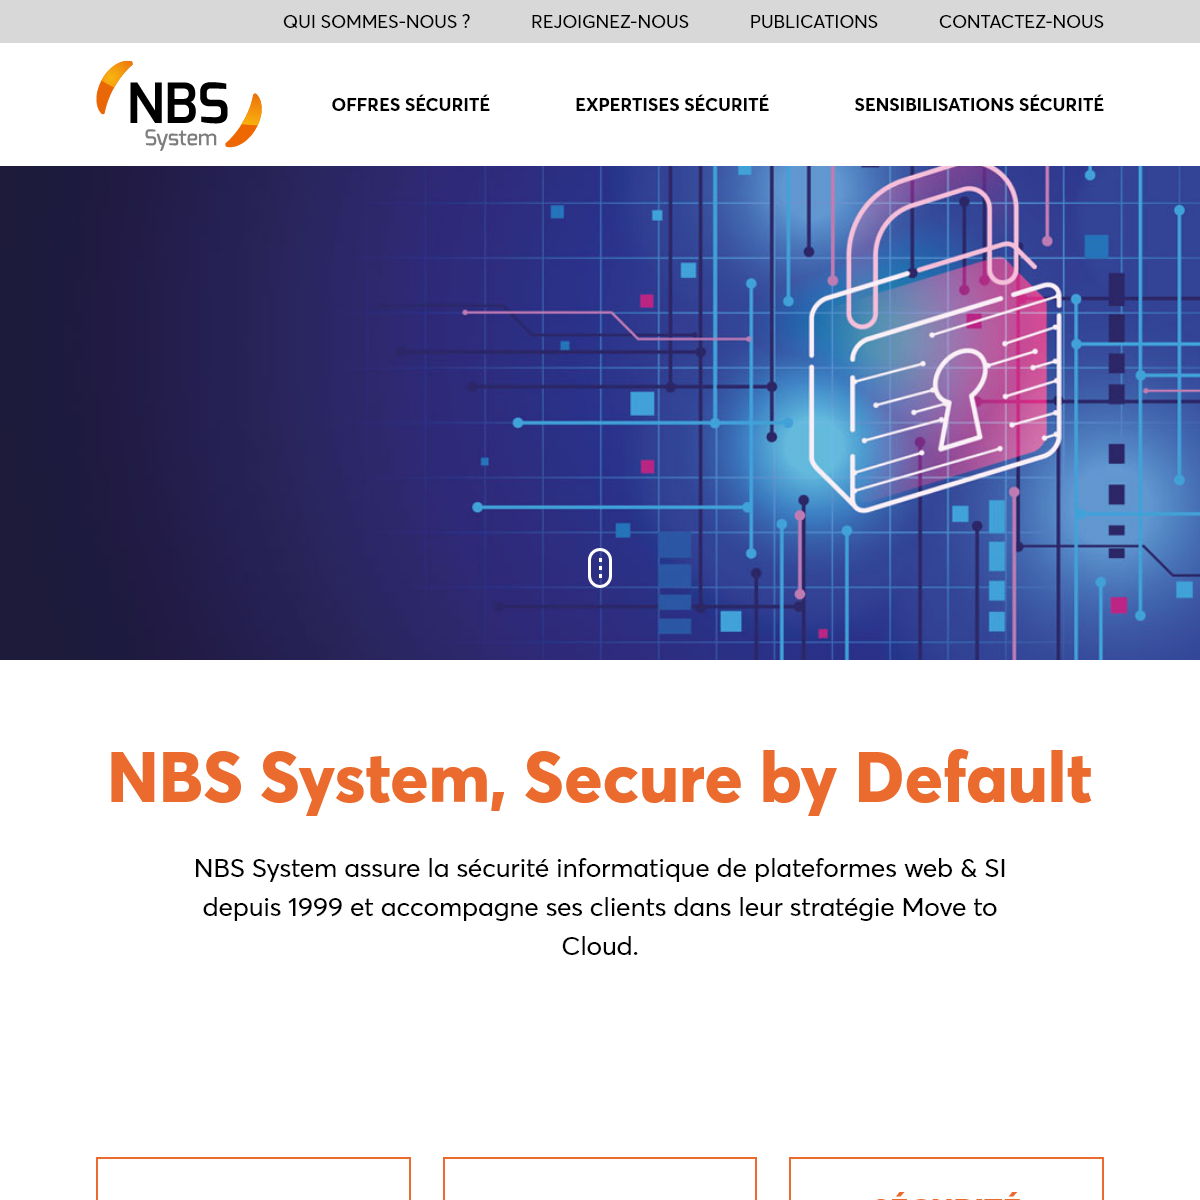 A complete backup of nbs-system.com